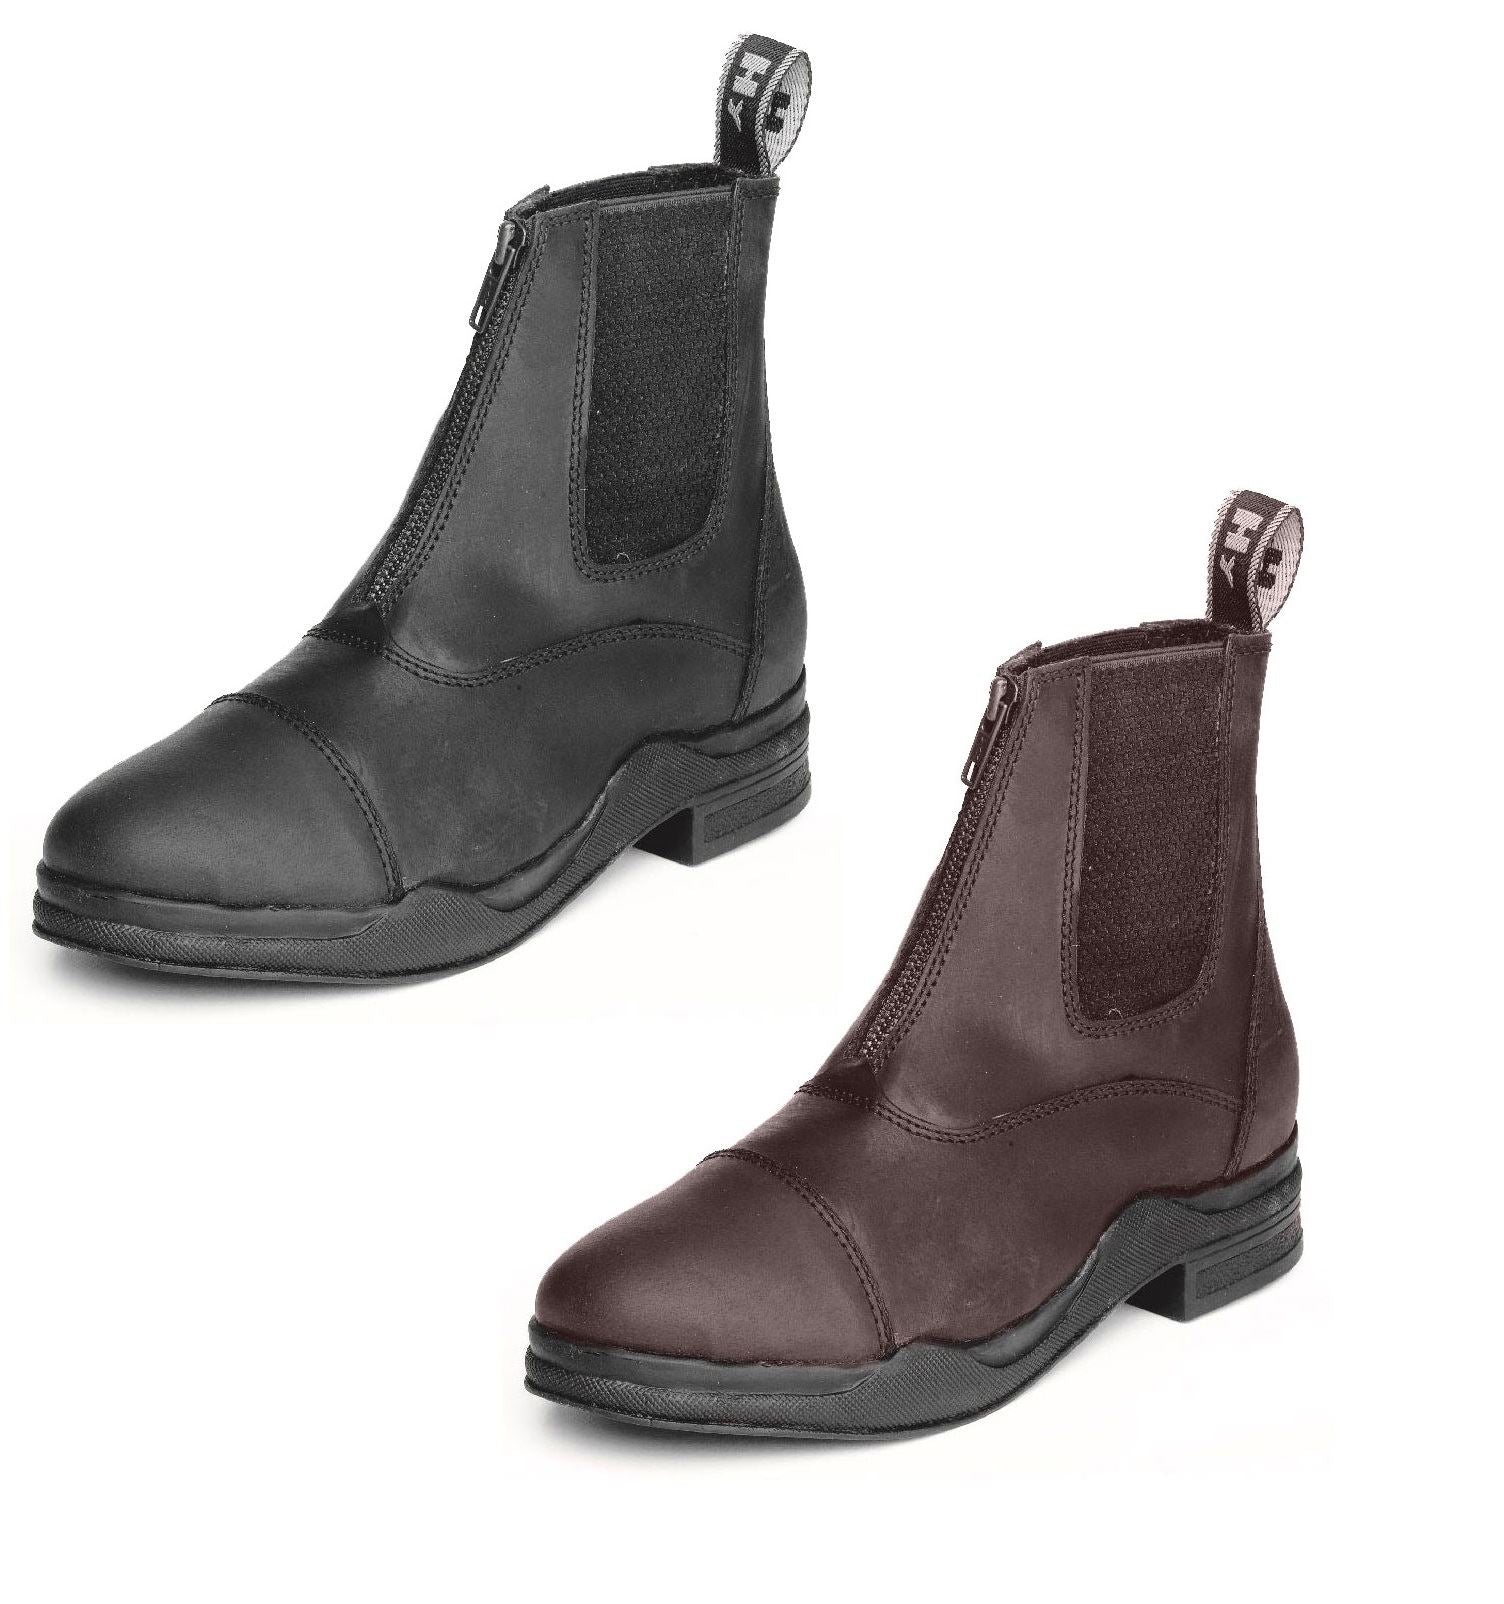 HyLAND Wax Leather Zip Boot - Just Horse Riders